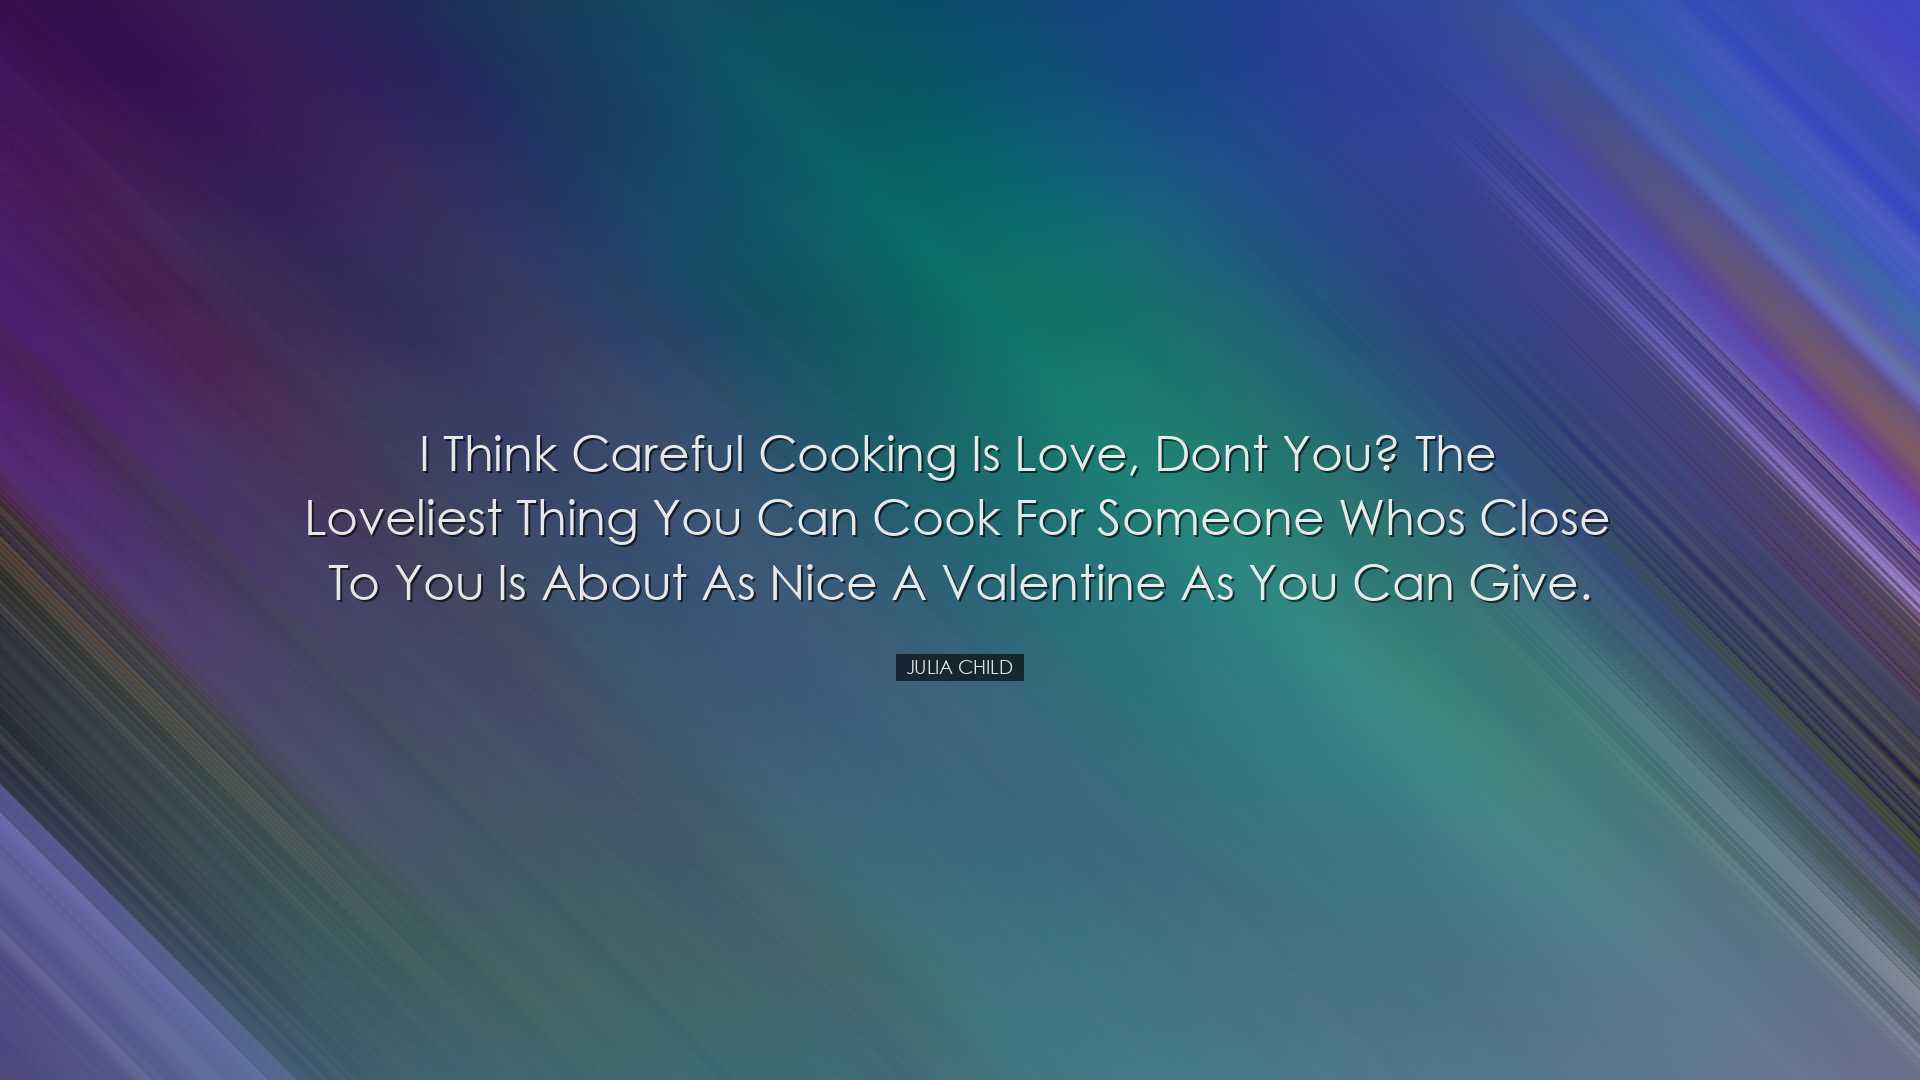 I think careful cooking is love, dont you? The loveliest thing you